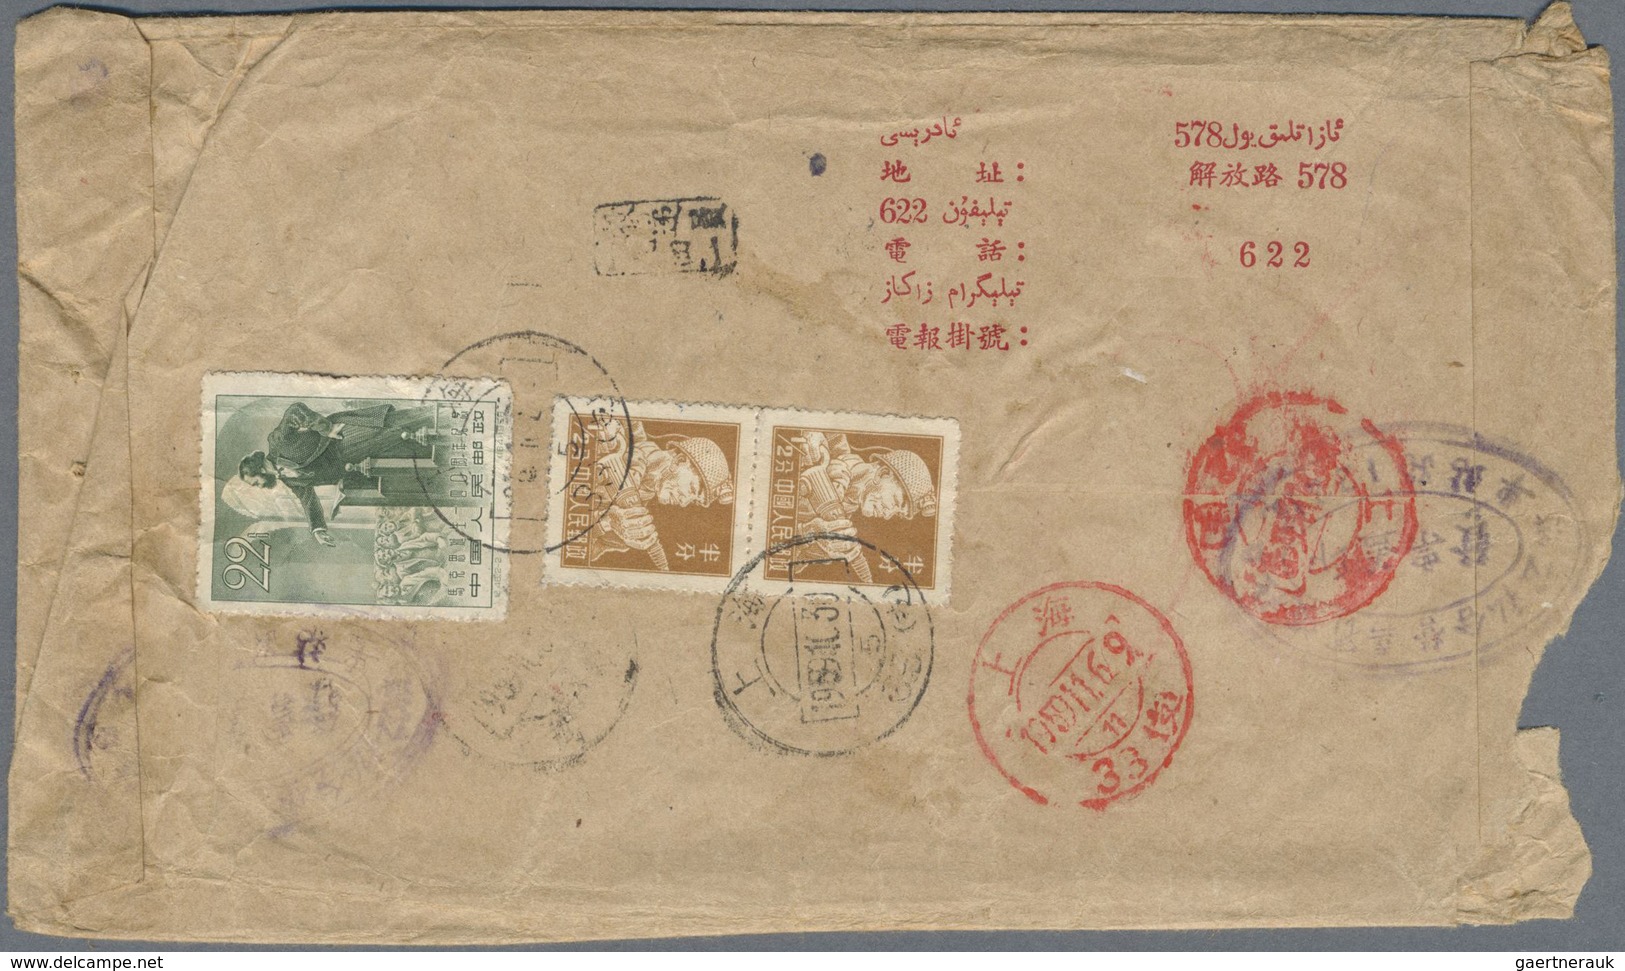 Br China - Volksrepublik: 1954/88 (ca.), covers/used ppc (88) plus cultural revolution opera "Red lante